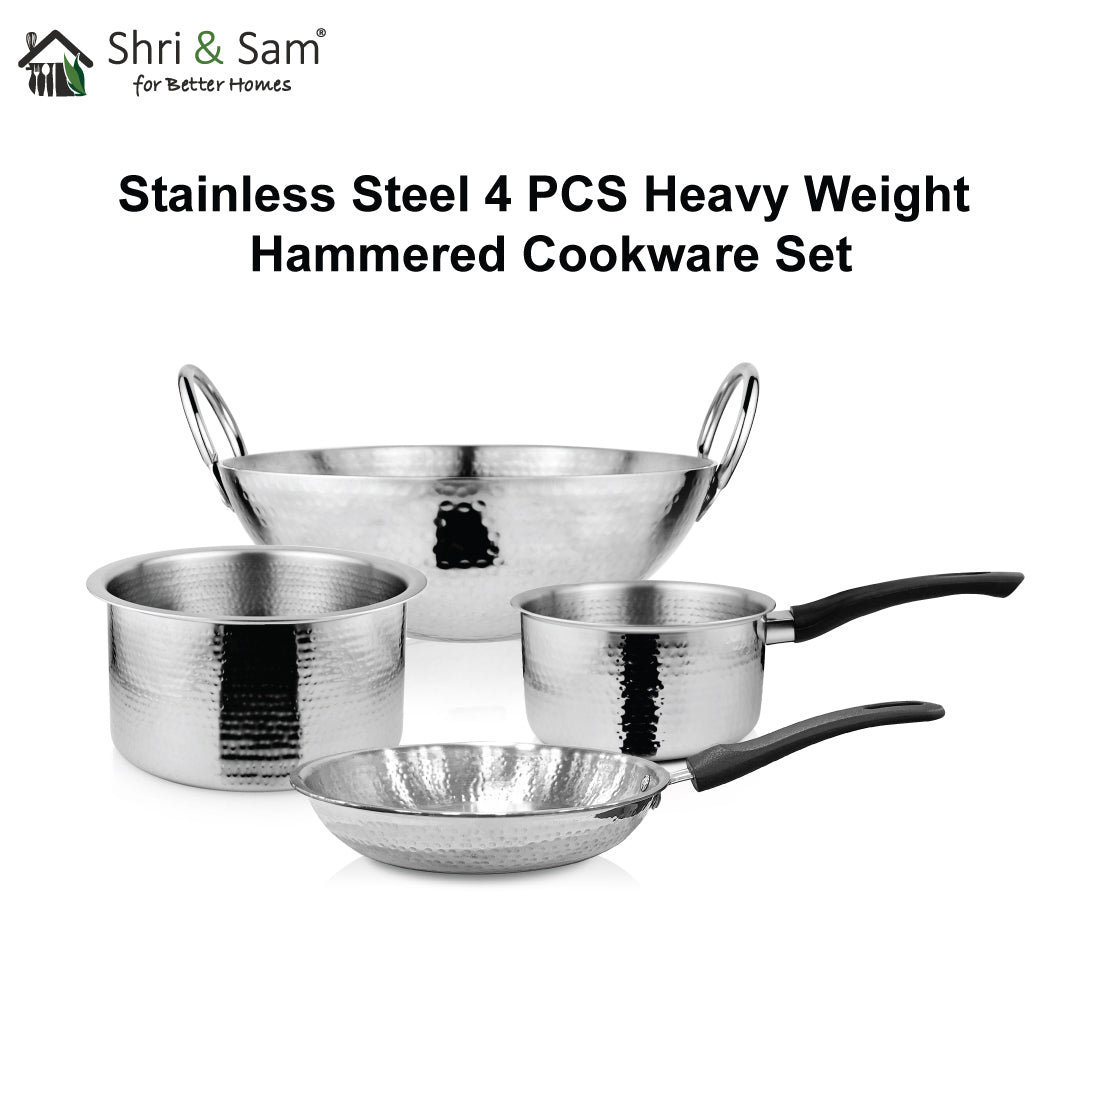 Stainless Steel 4 PCS Heavy Weight Hammered Cookware Set